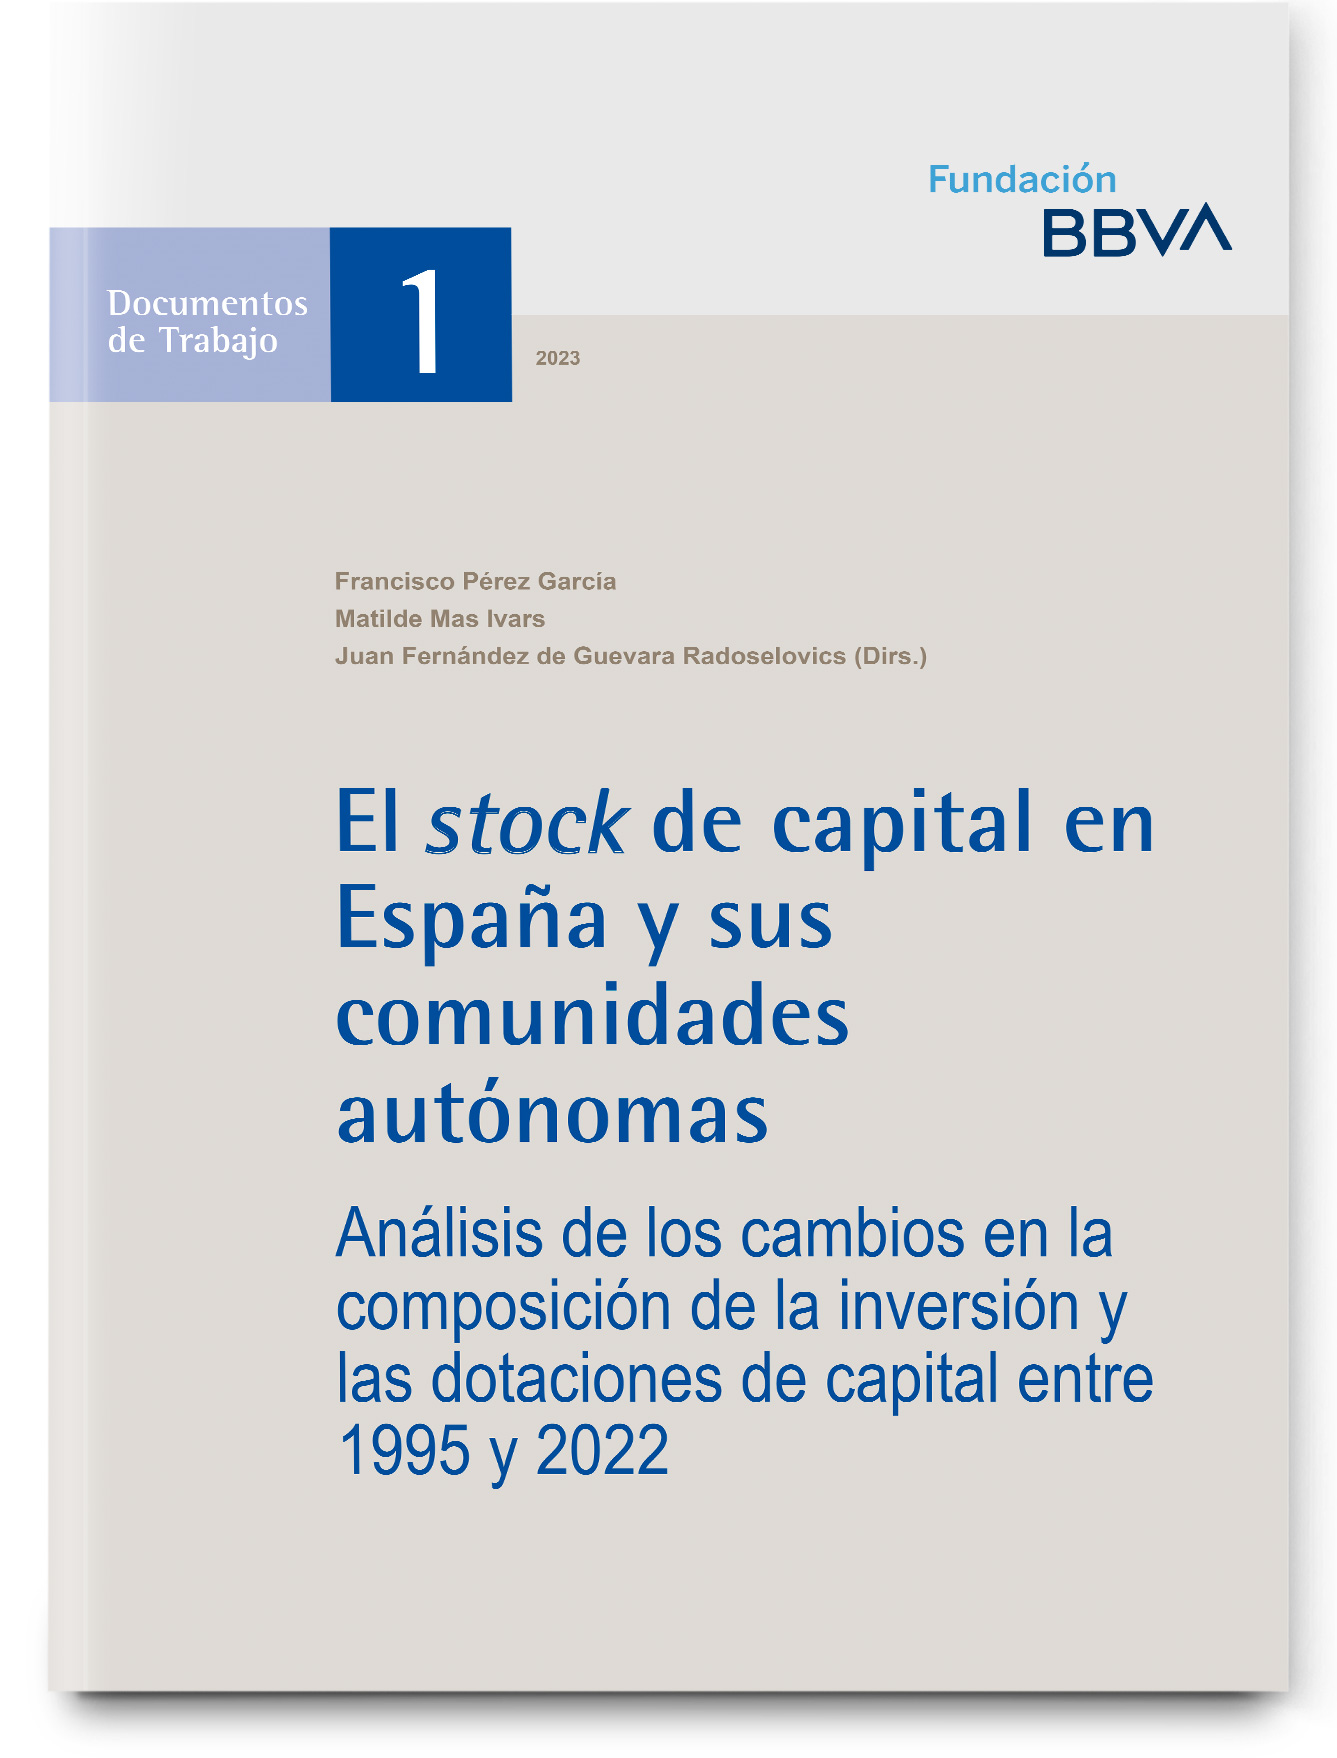 Investment and productive capital stock in Spain and its regions and provinces (1964-2022)